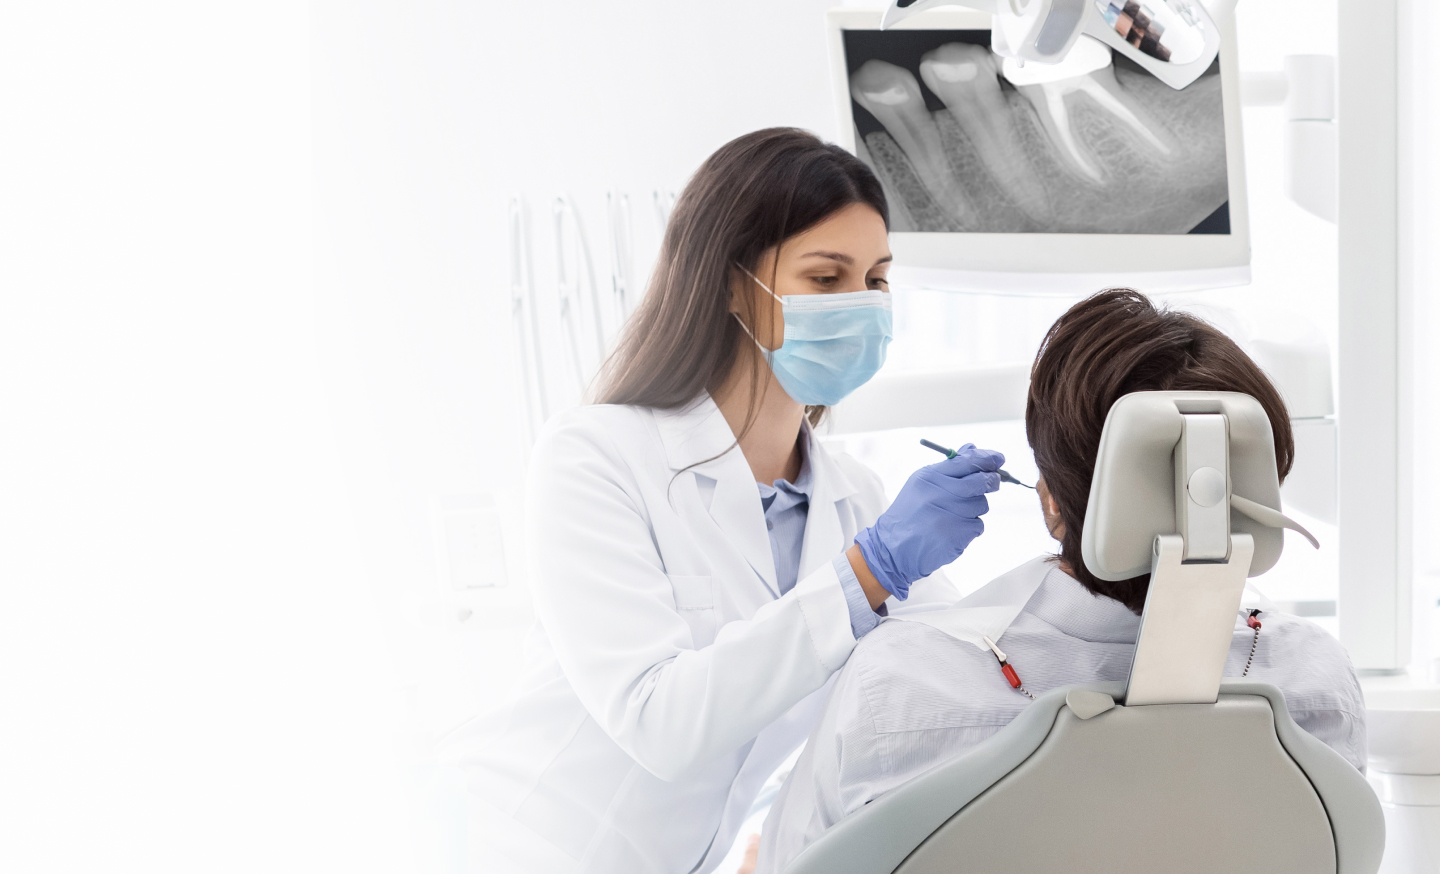 Dentists checking patient with a Dental x-ray